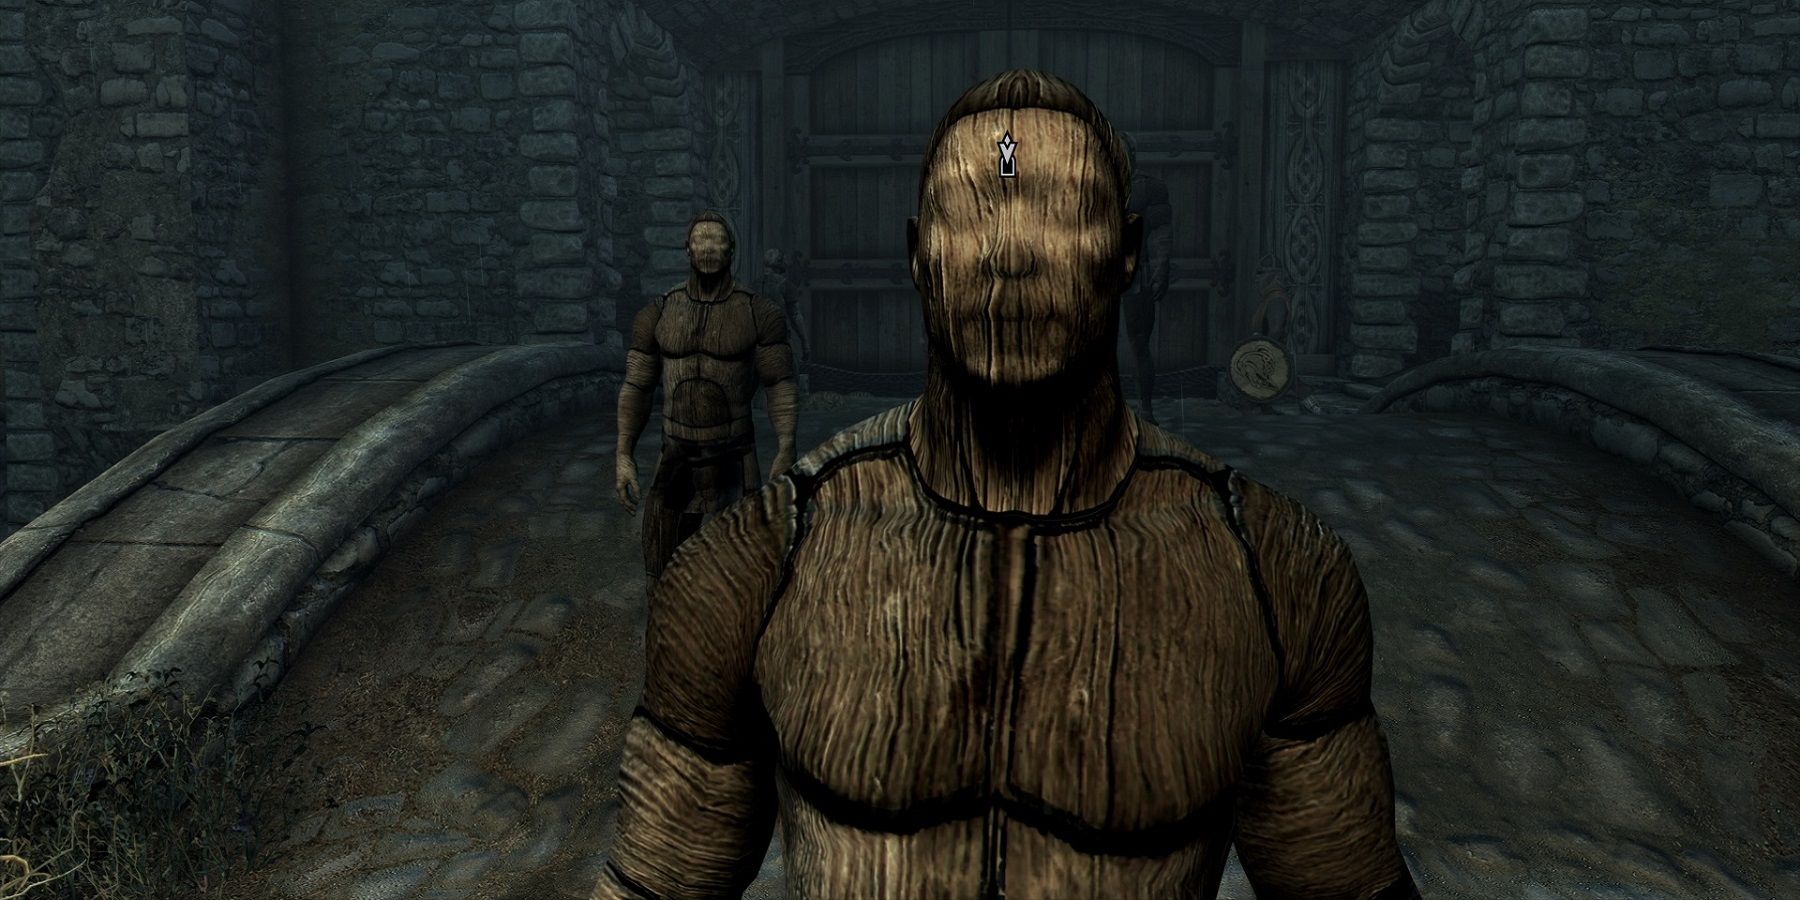 Creepy image from The Elder Scrolls 5: Skyrim showing a couple of mannequins.